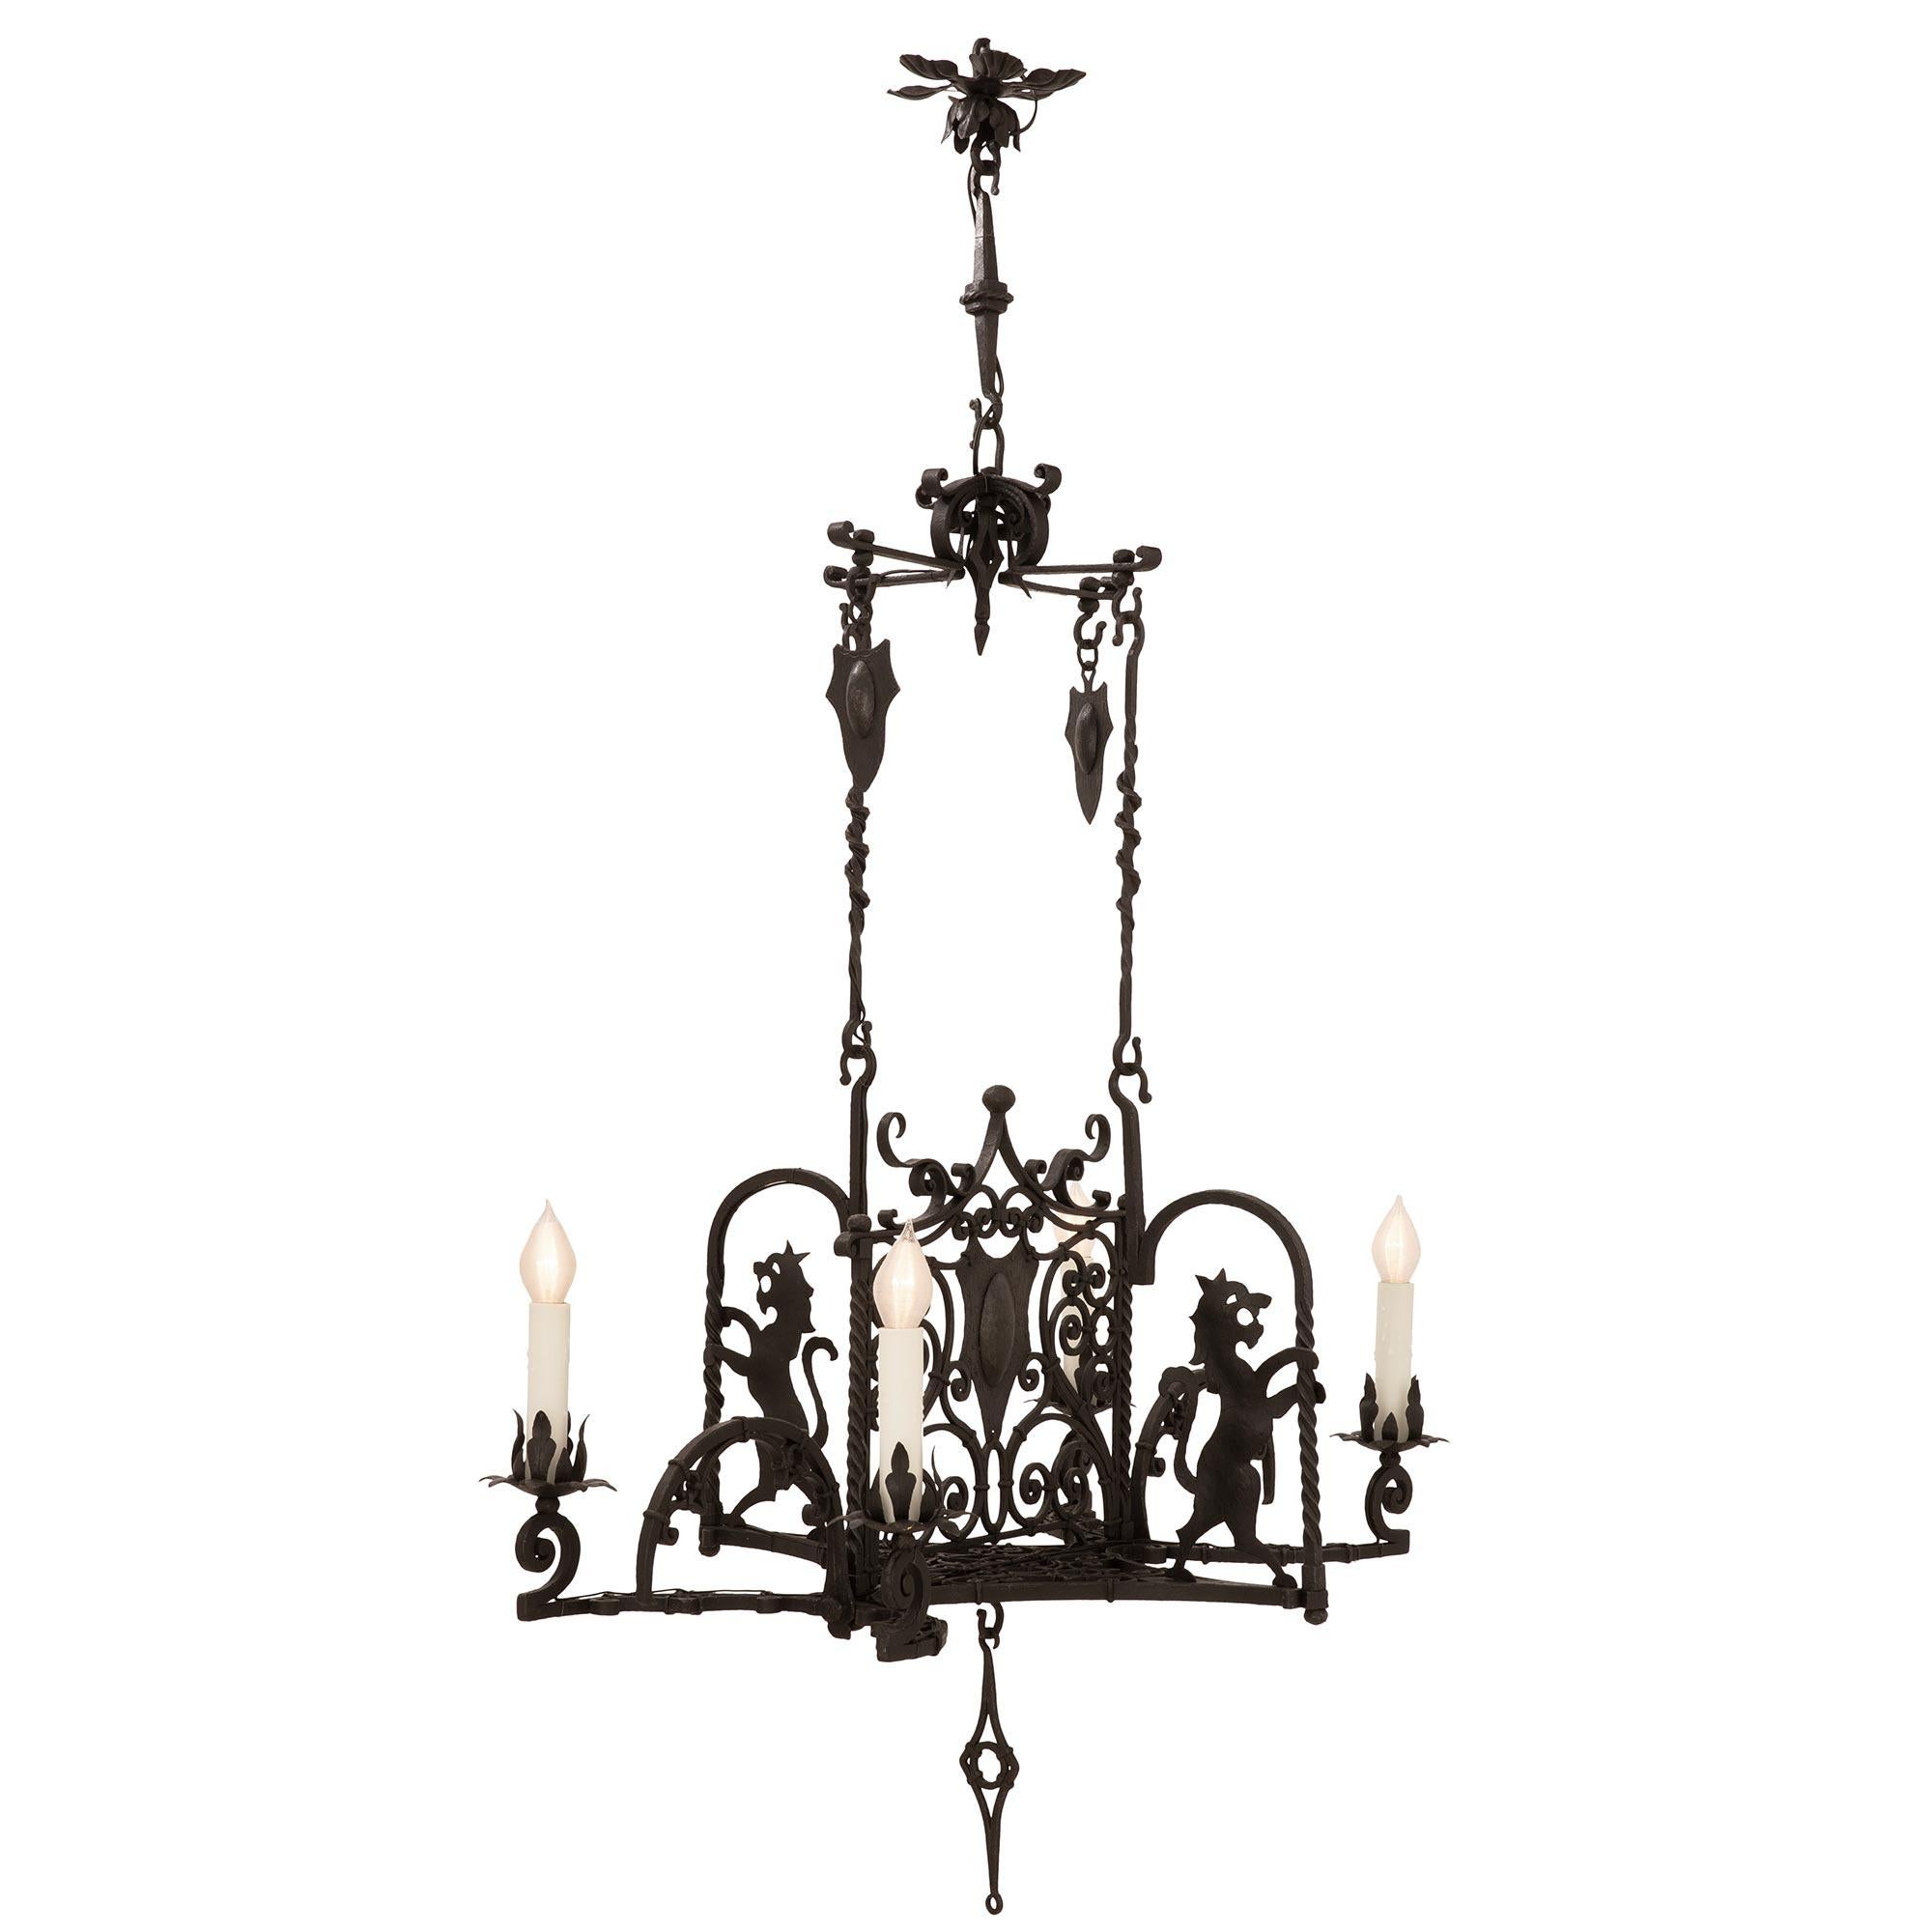 A beautiful and most unique Italian 19th century Renaissance St. wrought iron chandelier. The four arm chandelier is centered by an elegant curved diamond shaped pendant below the exceptional pierced bottom tier with the same shape when seen from